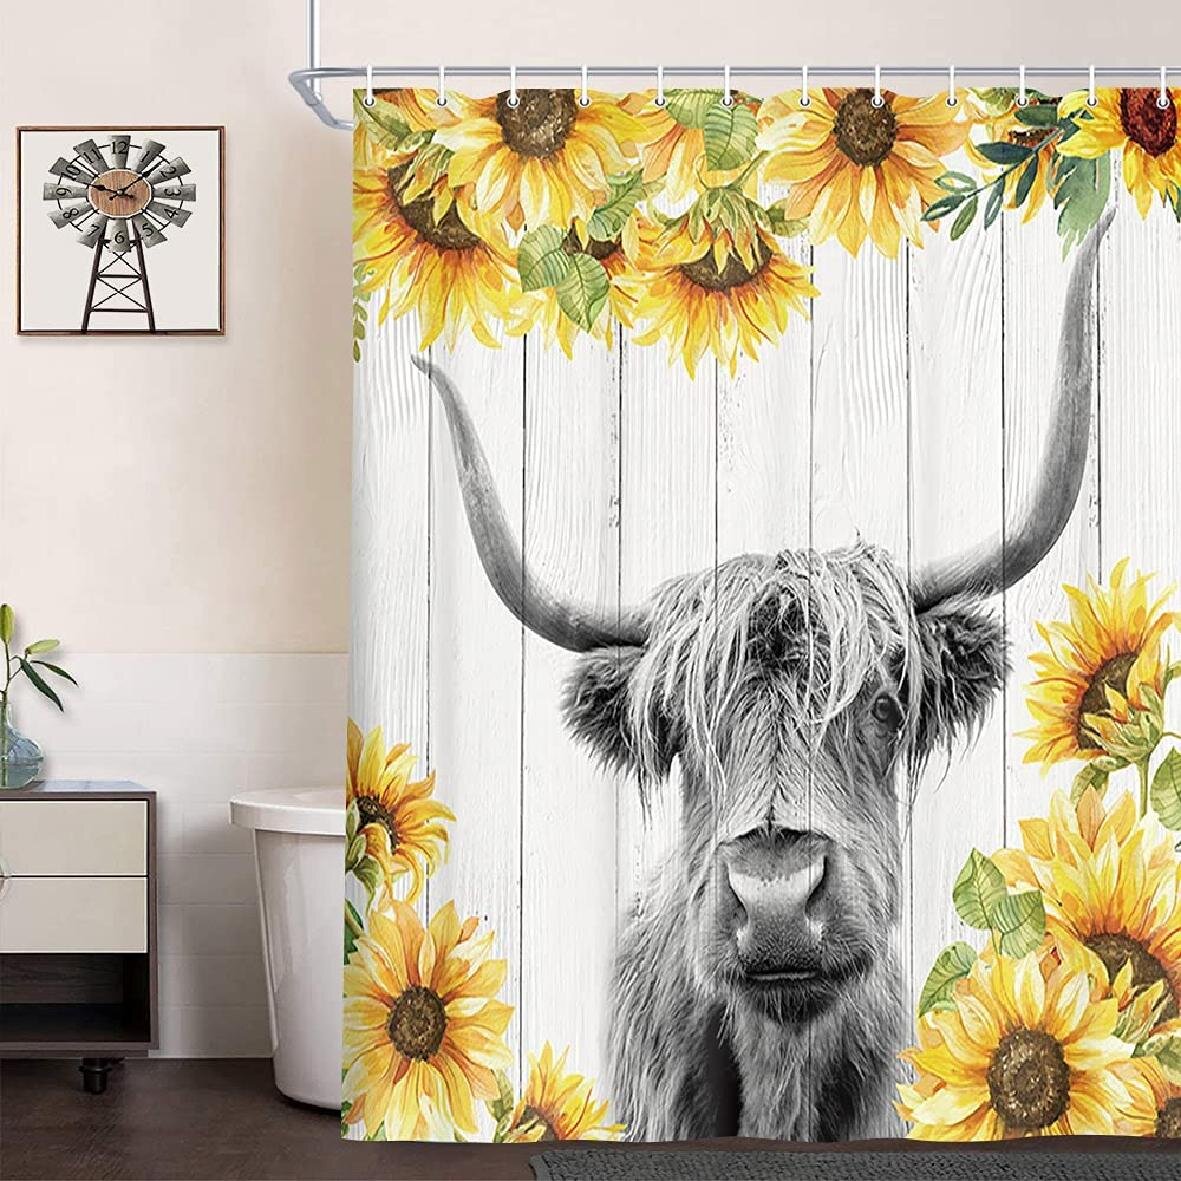 Get Naked Shower Curtain Funny Highland Cow with Sunflowers For Bathroom Decor 